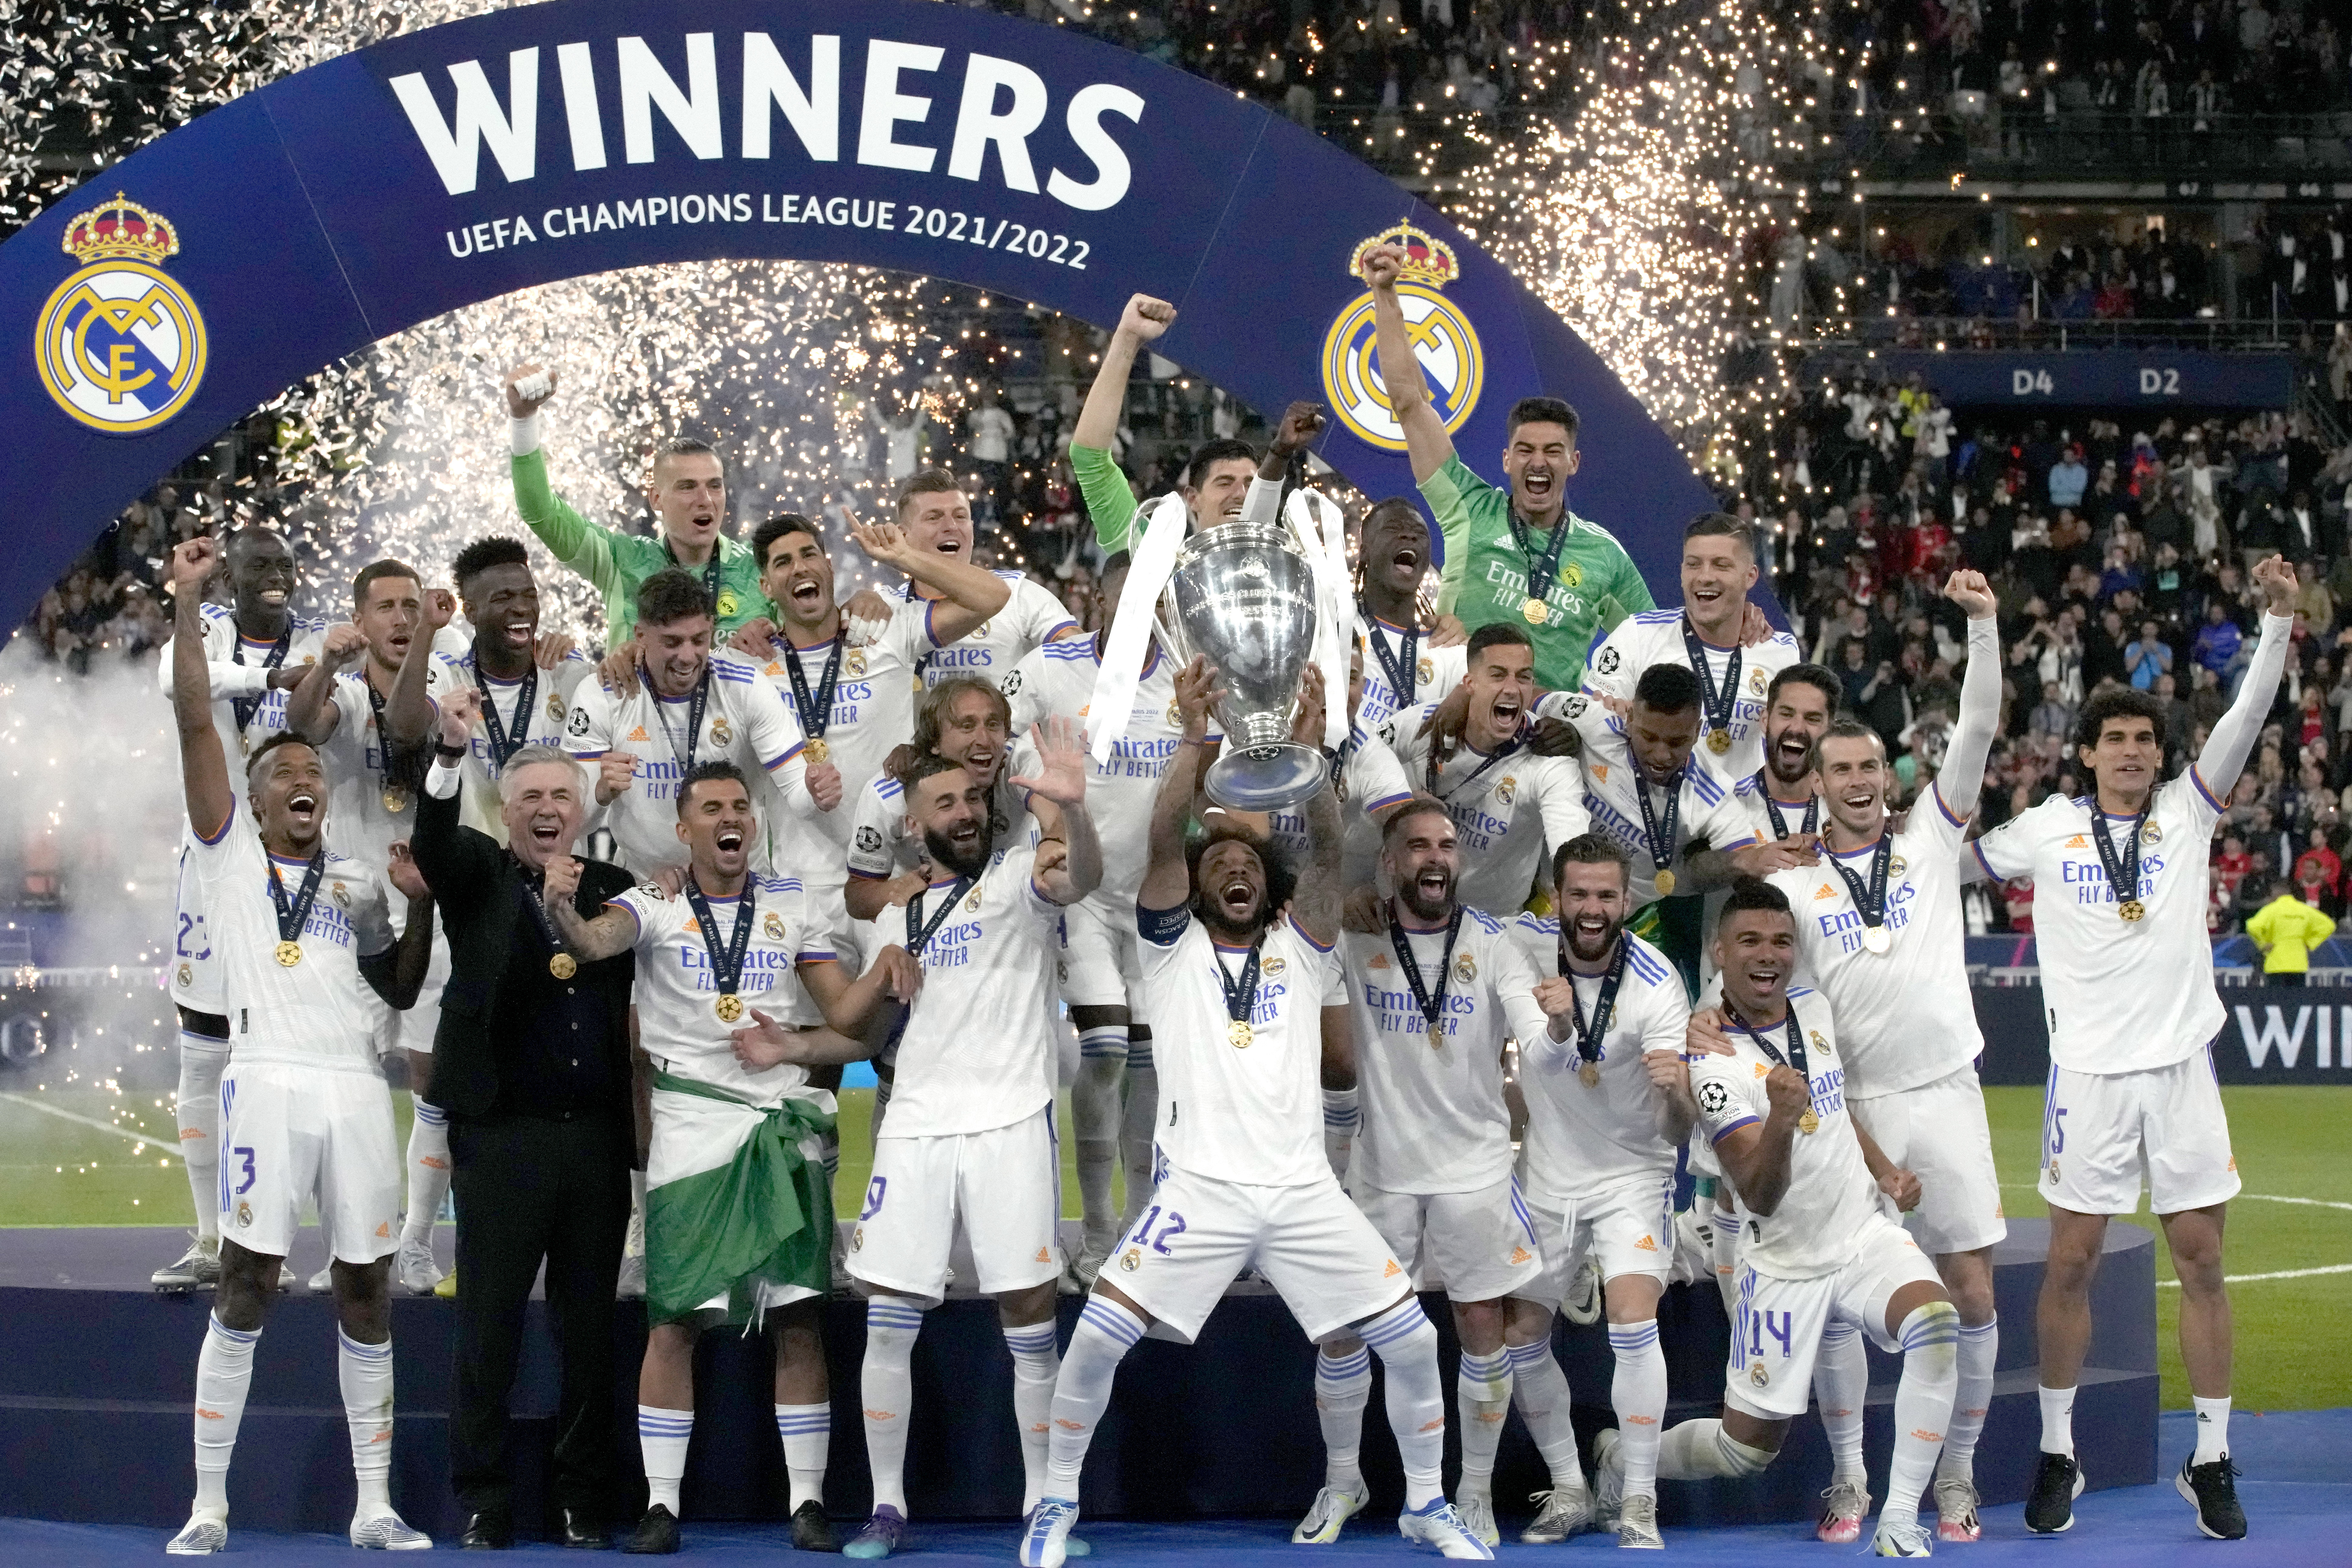 How to watch Champions League in USA Free live stream, English and Spanish TV channels